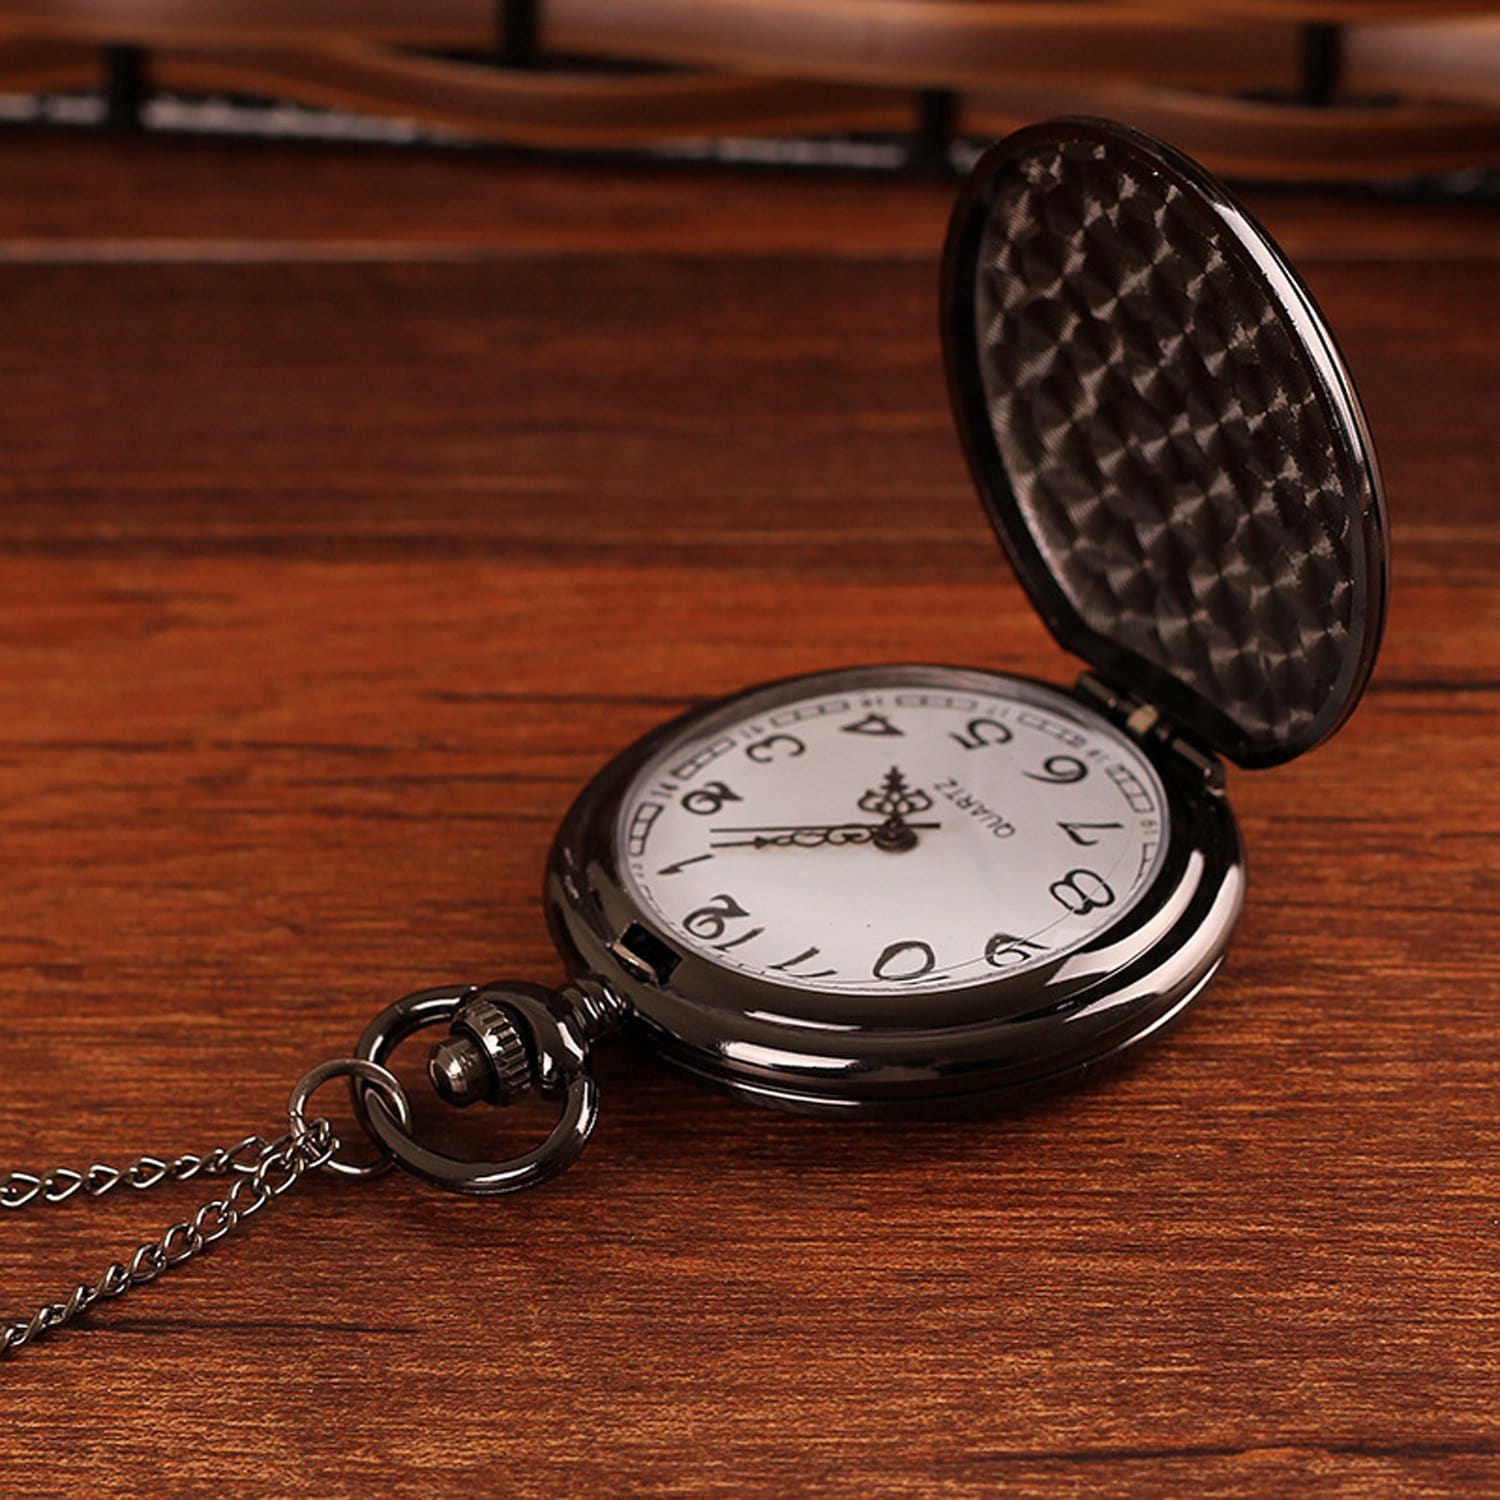 Pocket Watches To My Husband - The Best Part Is That You And Me Pocket Watch GiveMe-Gifts